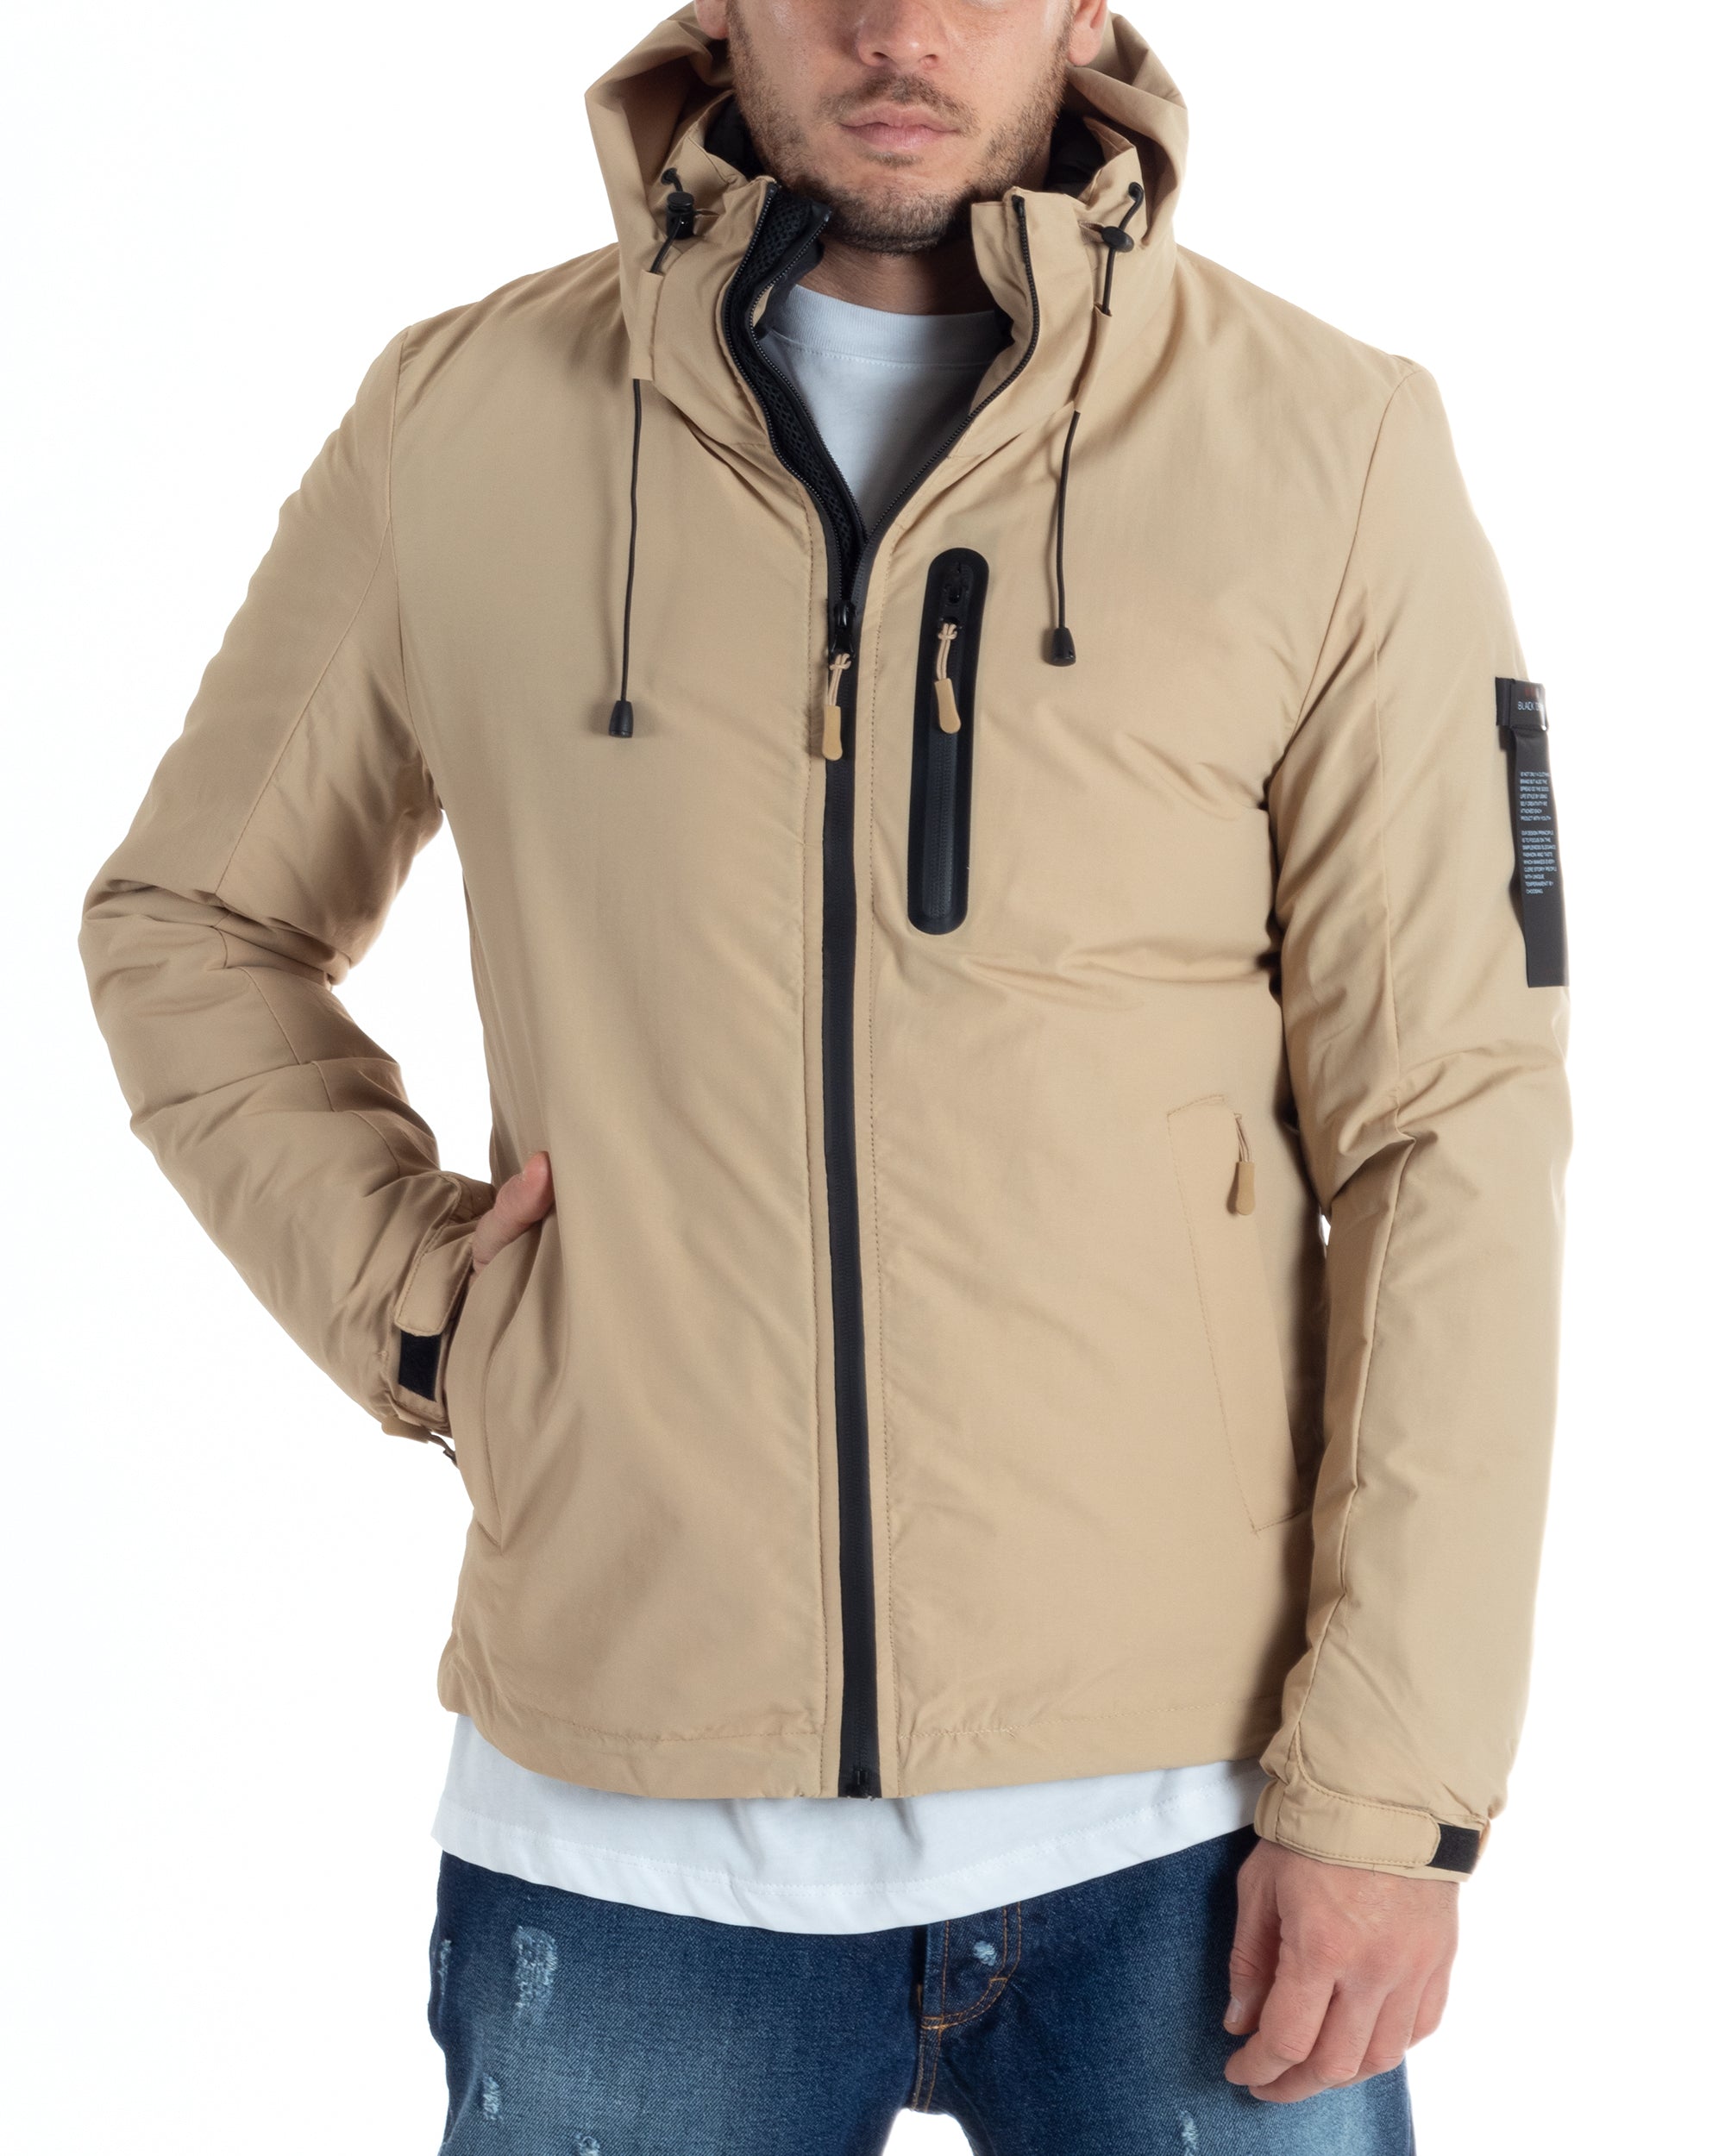 Men's Waterproof Trench Jacket Technical Fabric Long Padded Jacket With Hood Zipper Black GIOSAL-G3091A